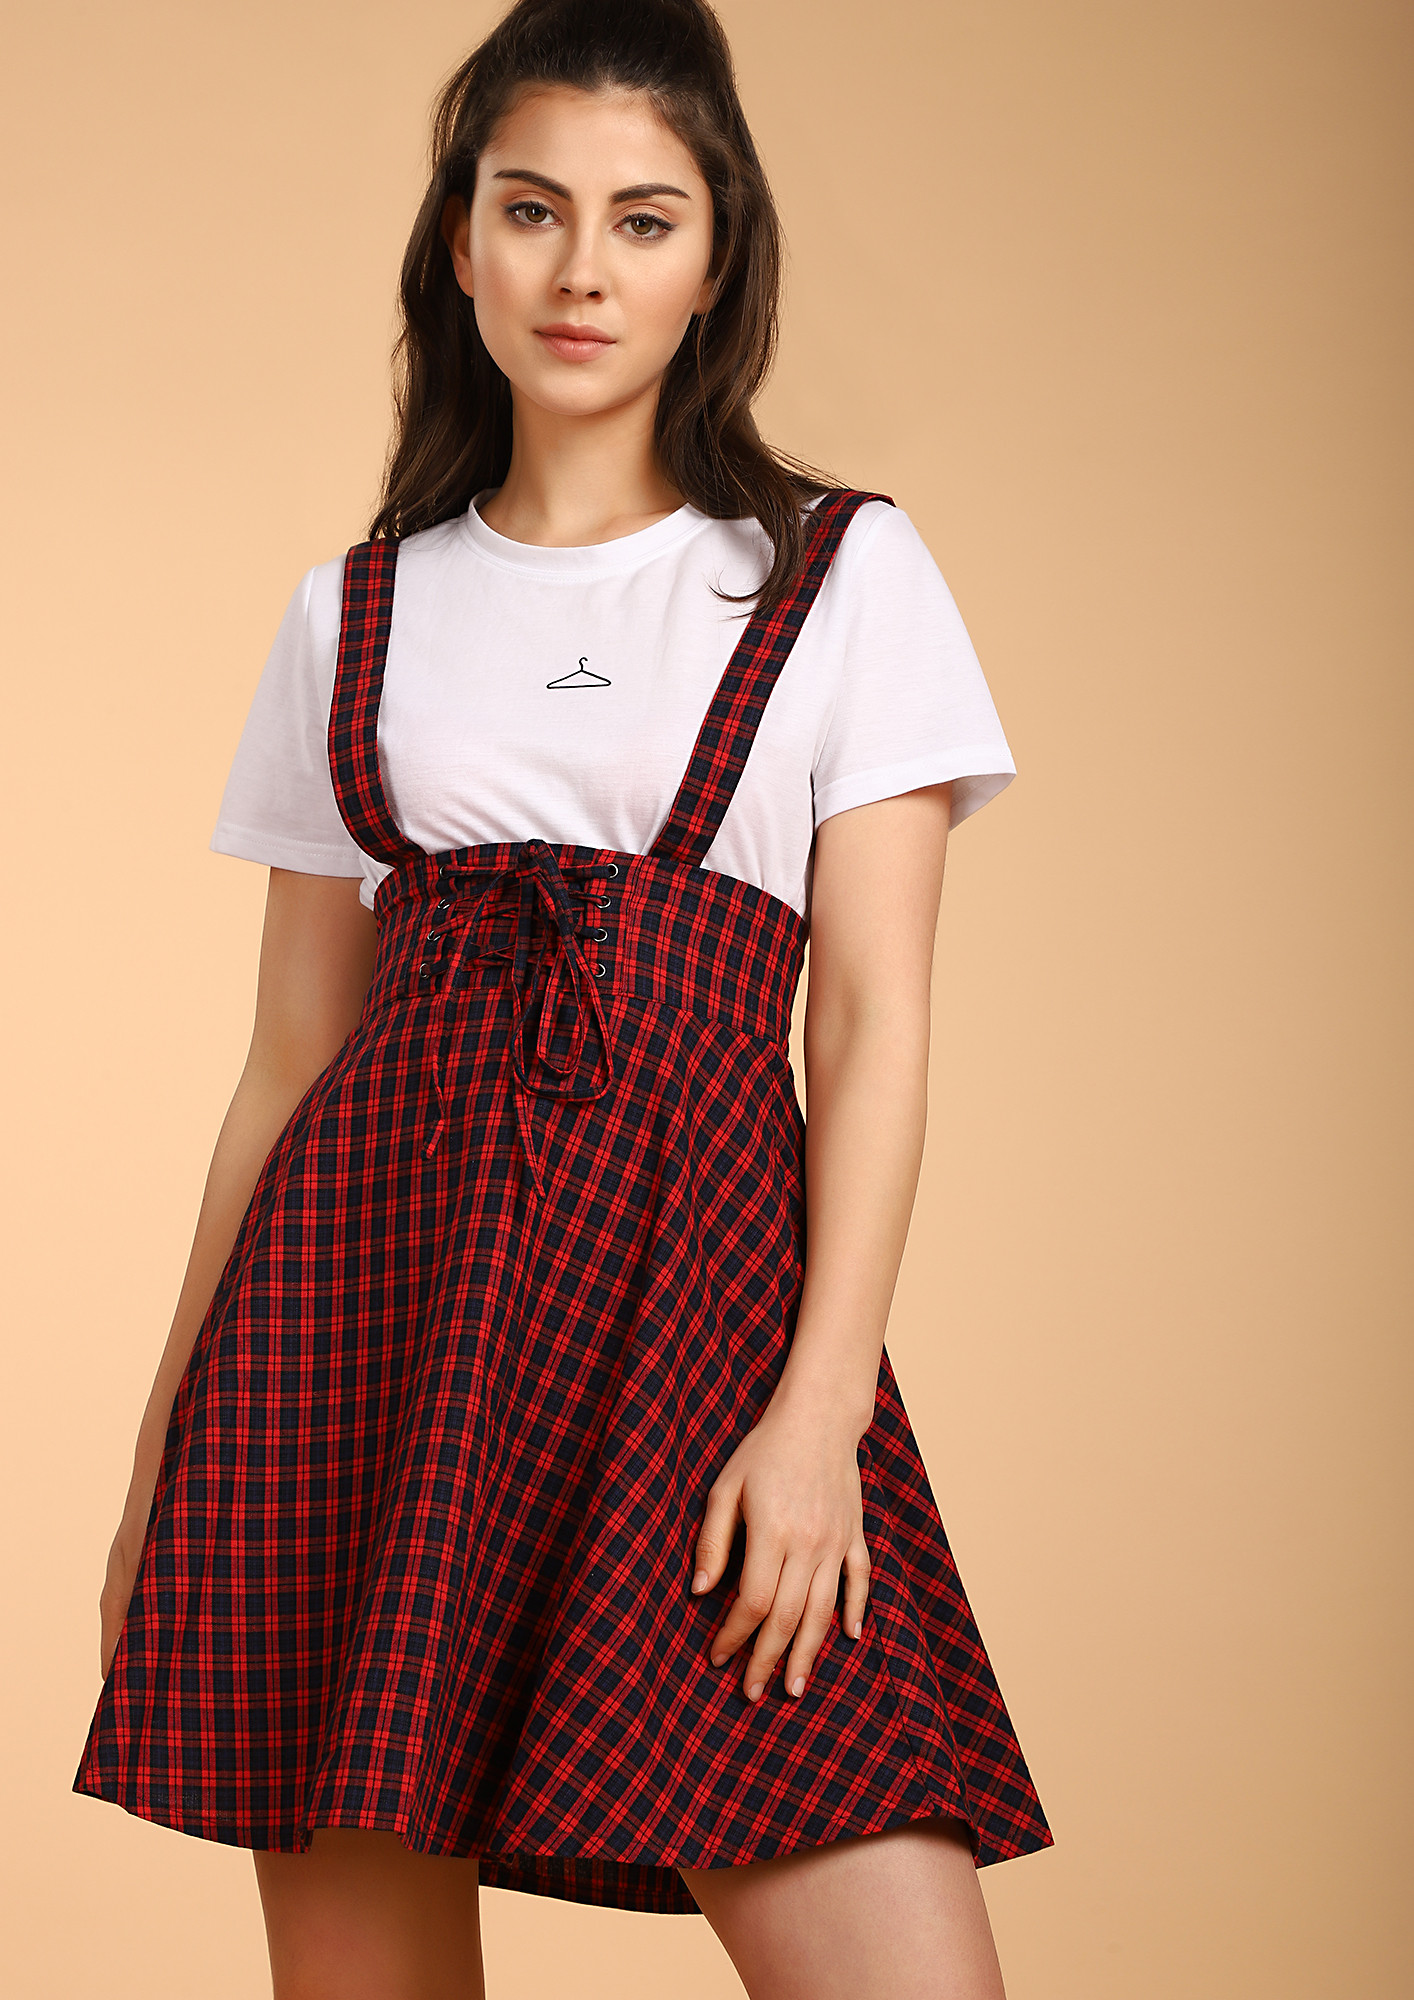 SPREADING MY SCHOOL-GIRL CHARM RED PINAFORE SKIRT